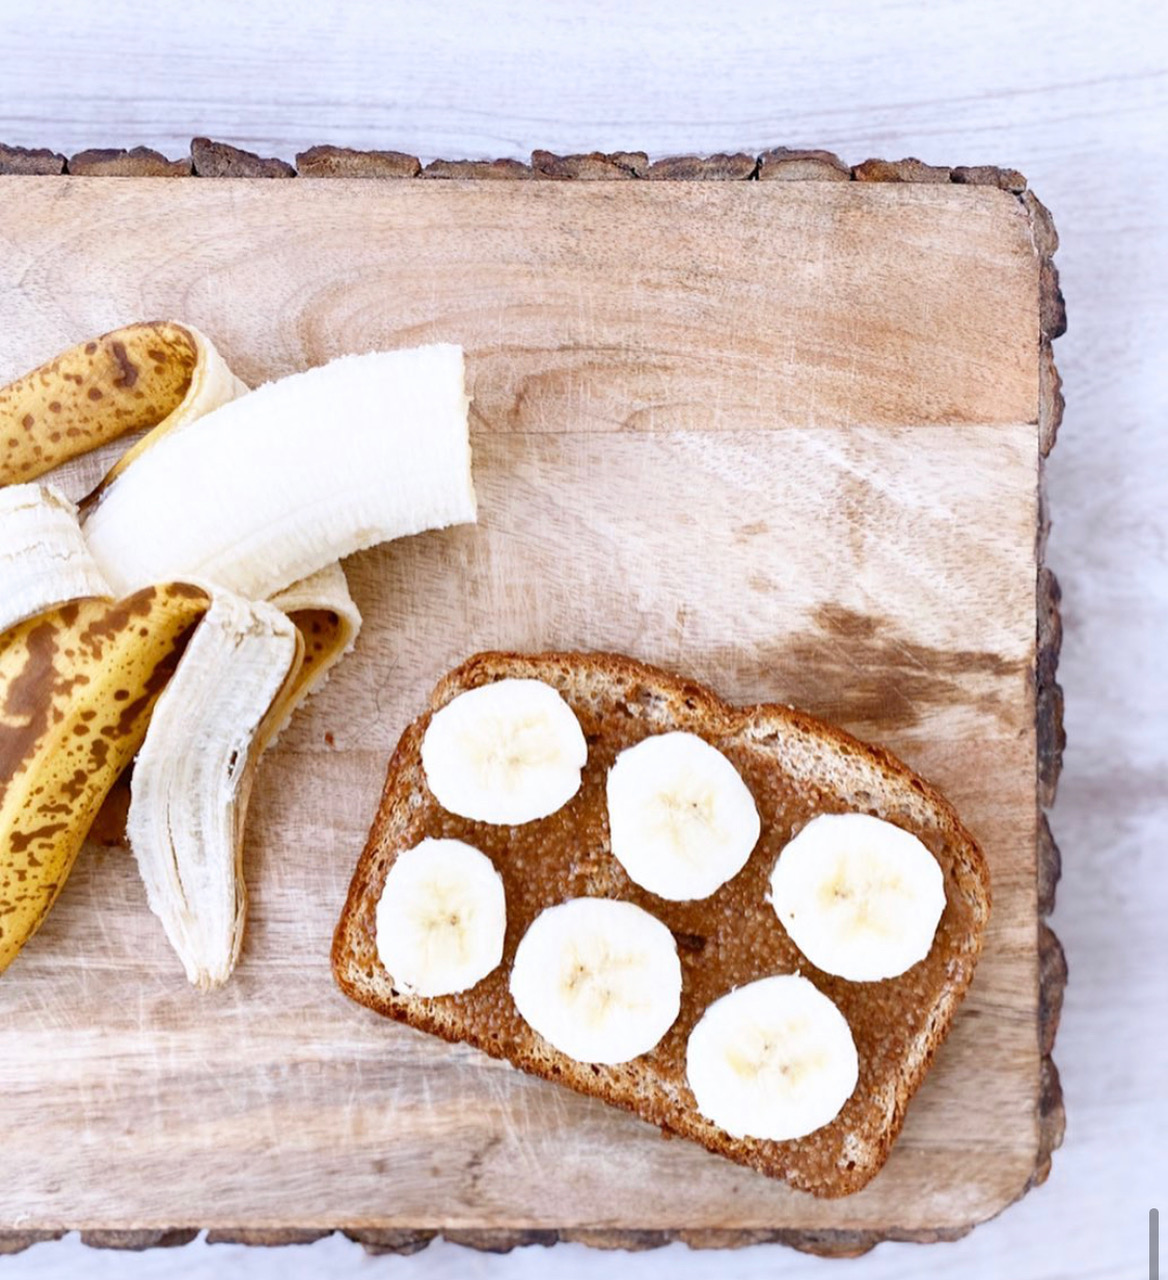 On a raw edge wooden cutting board, there is a slice of bread with nut butter and circles of sliced banana. Photo from Butter Babe's Instagram page.